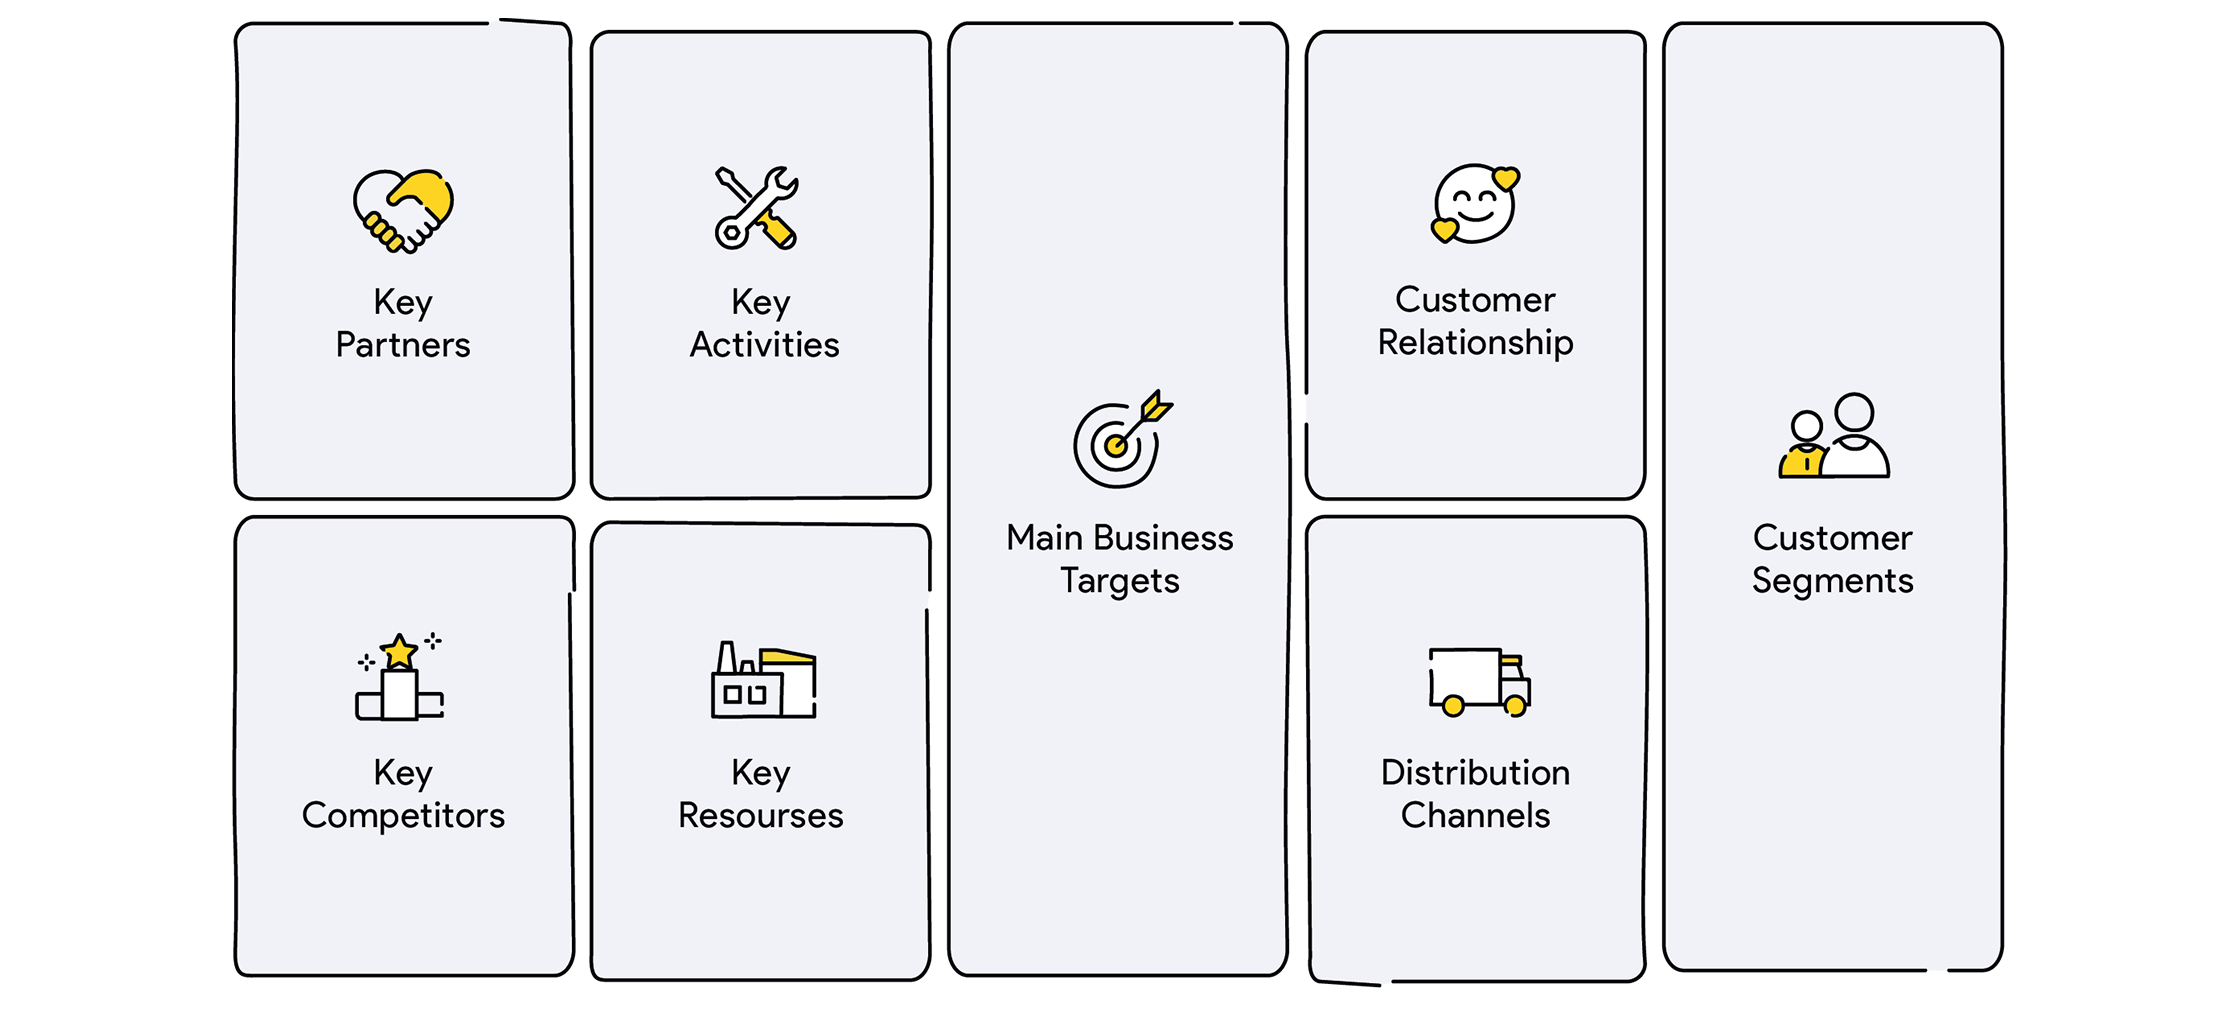 A practical guide to building a brand strategy - Business model canvas - Qubstudio